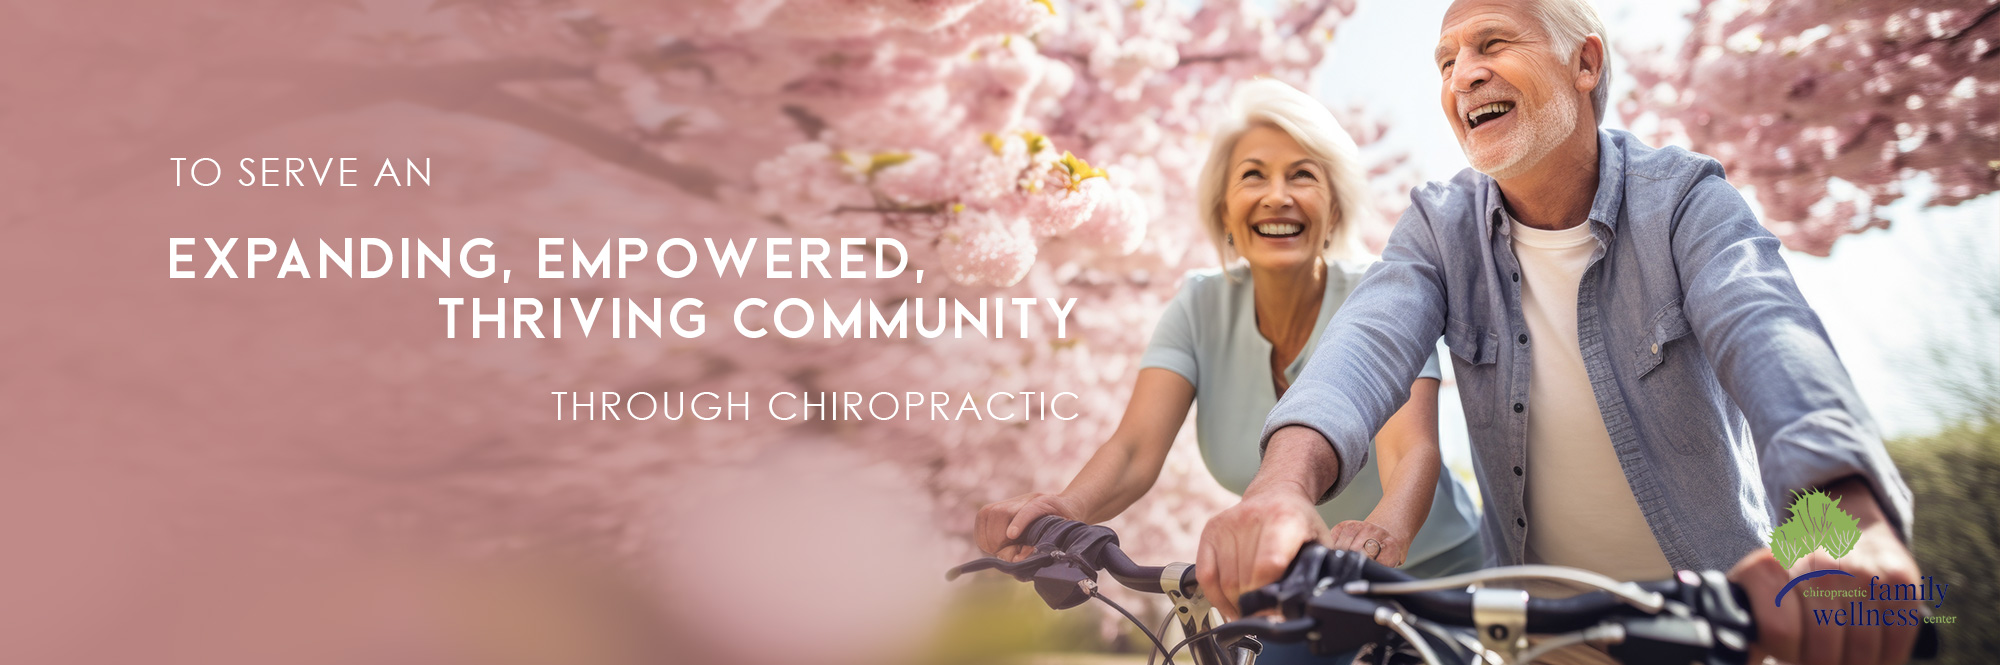 Geriatric Chiropractic Care - Chiropractic Family Wellness Center, Scarborough ME